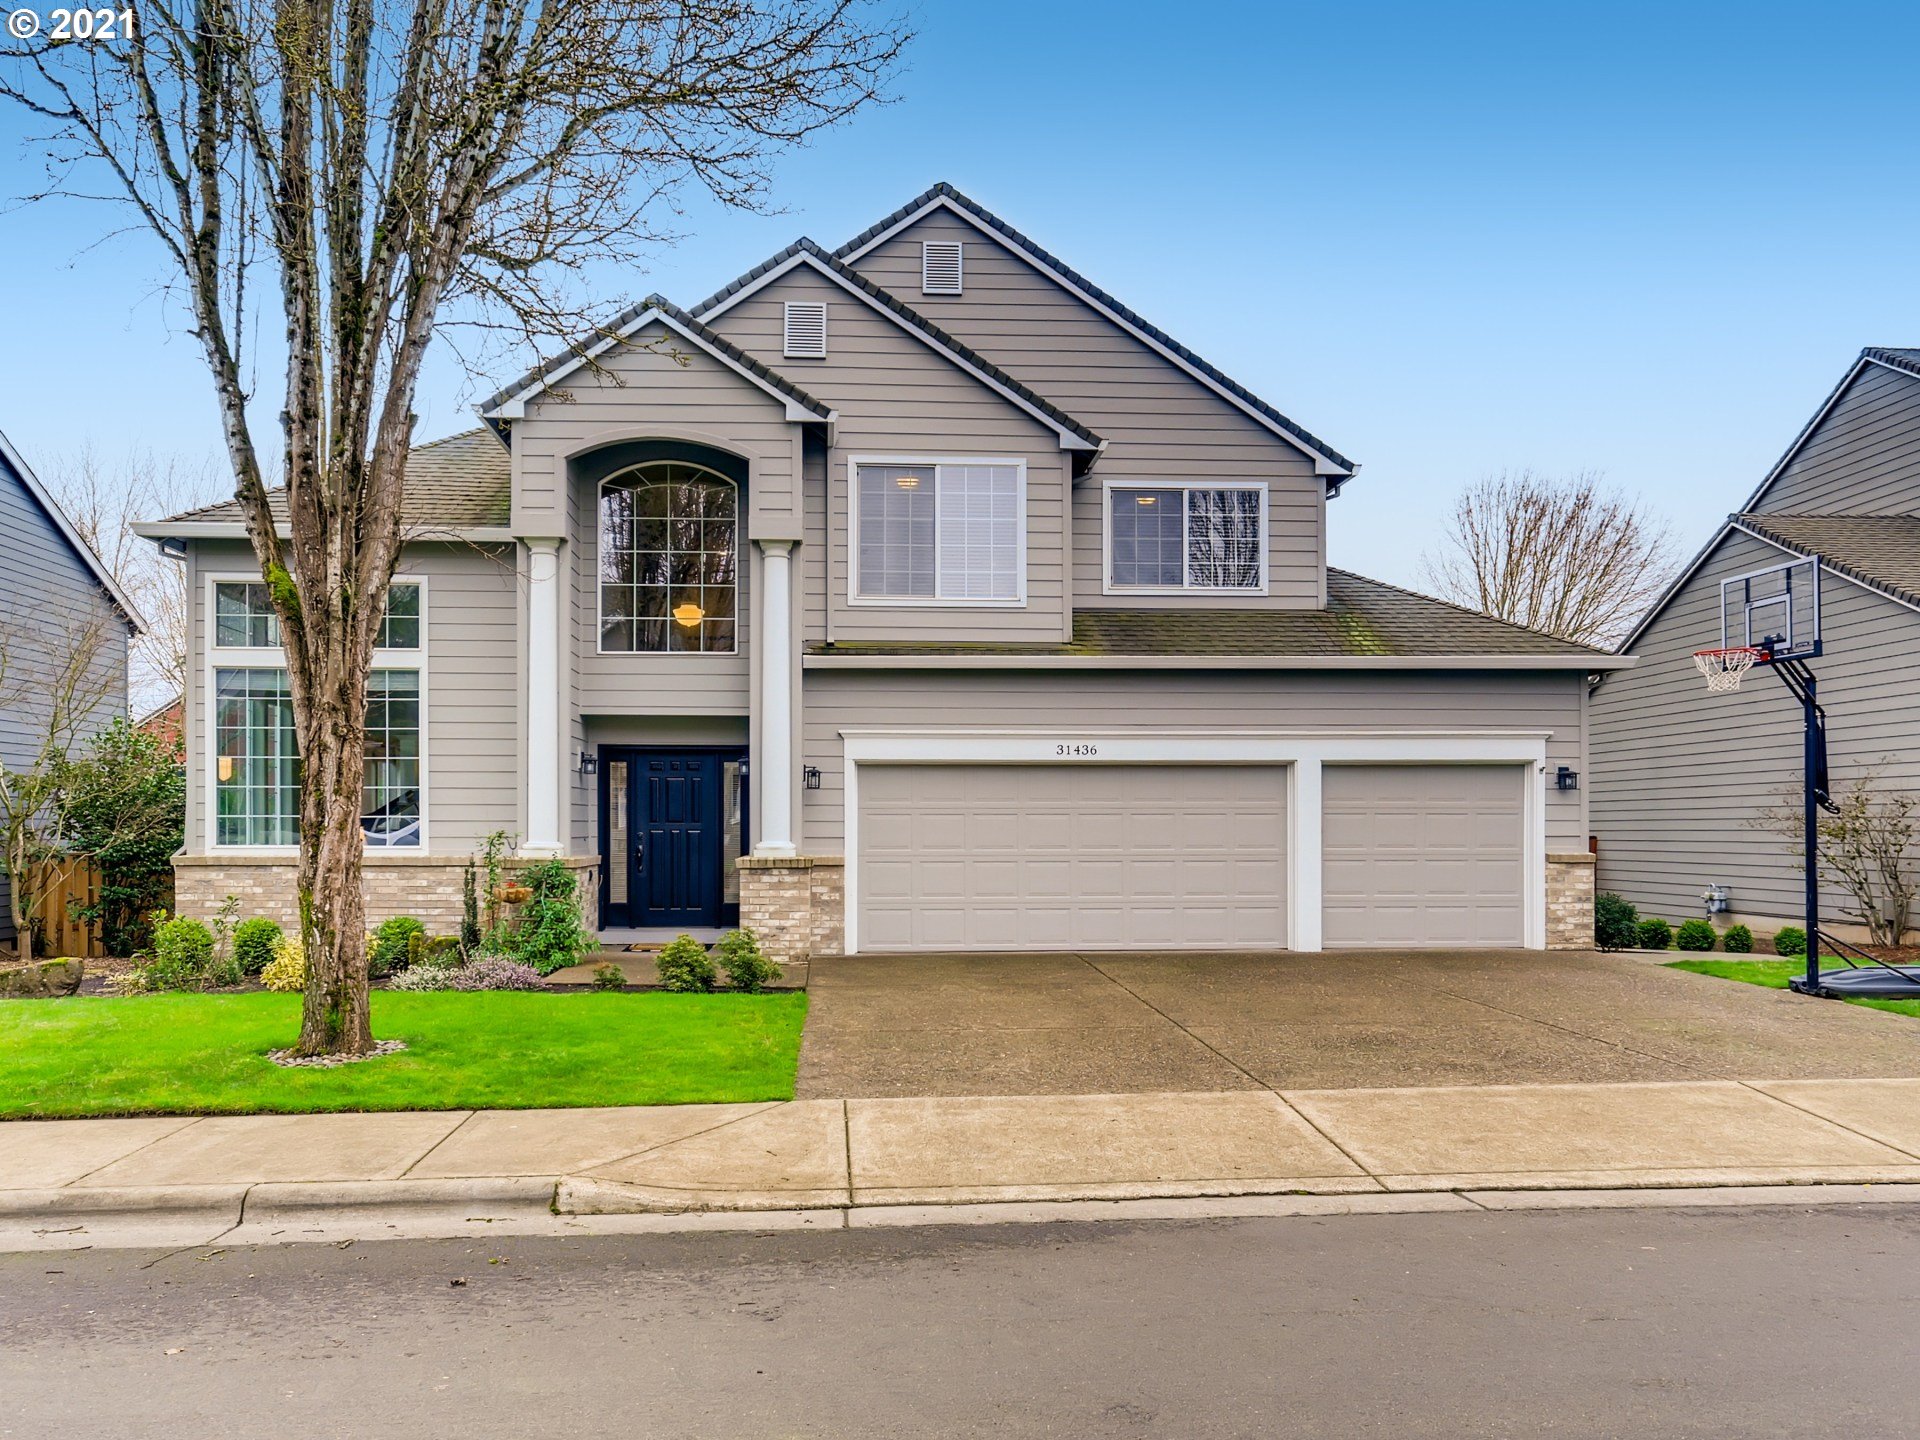 31436 SW OLYMPIC DR (1 of 27)